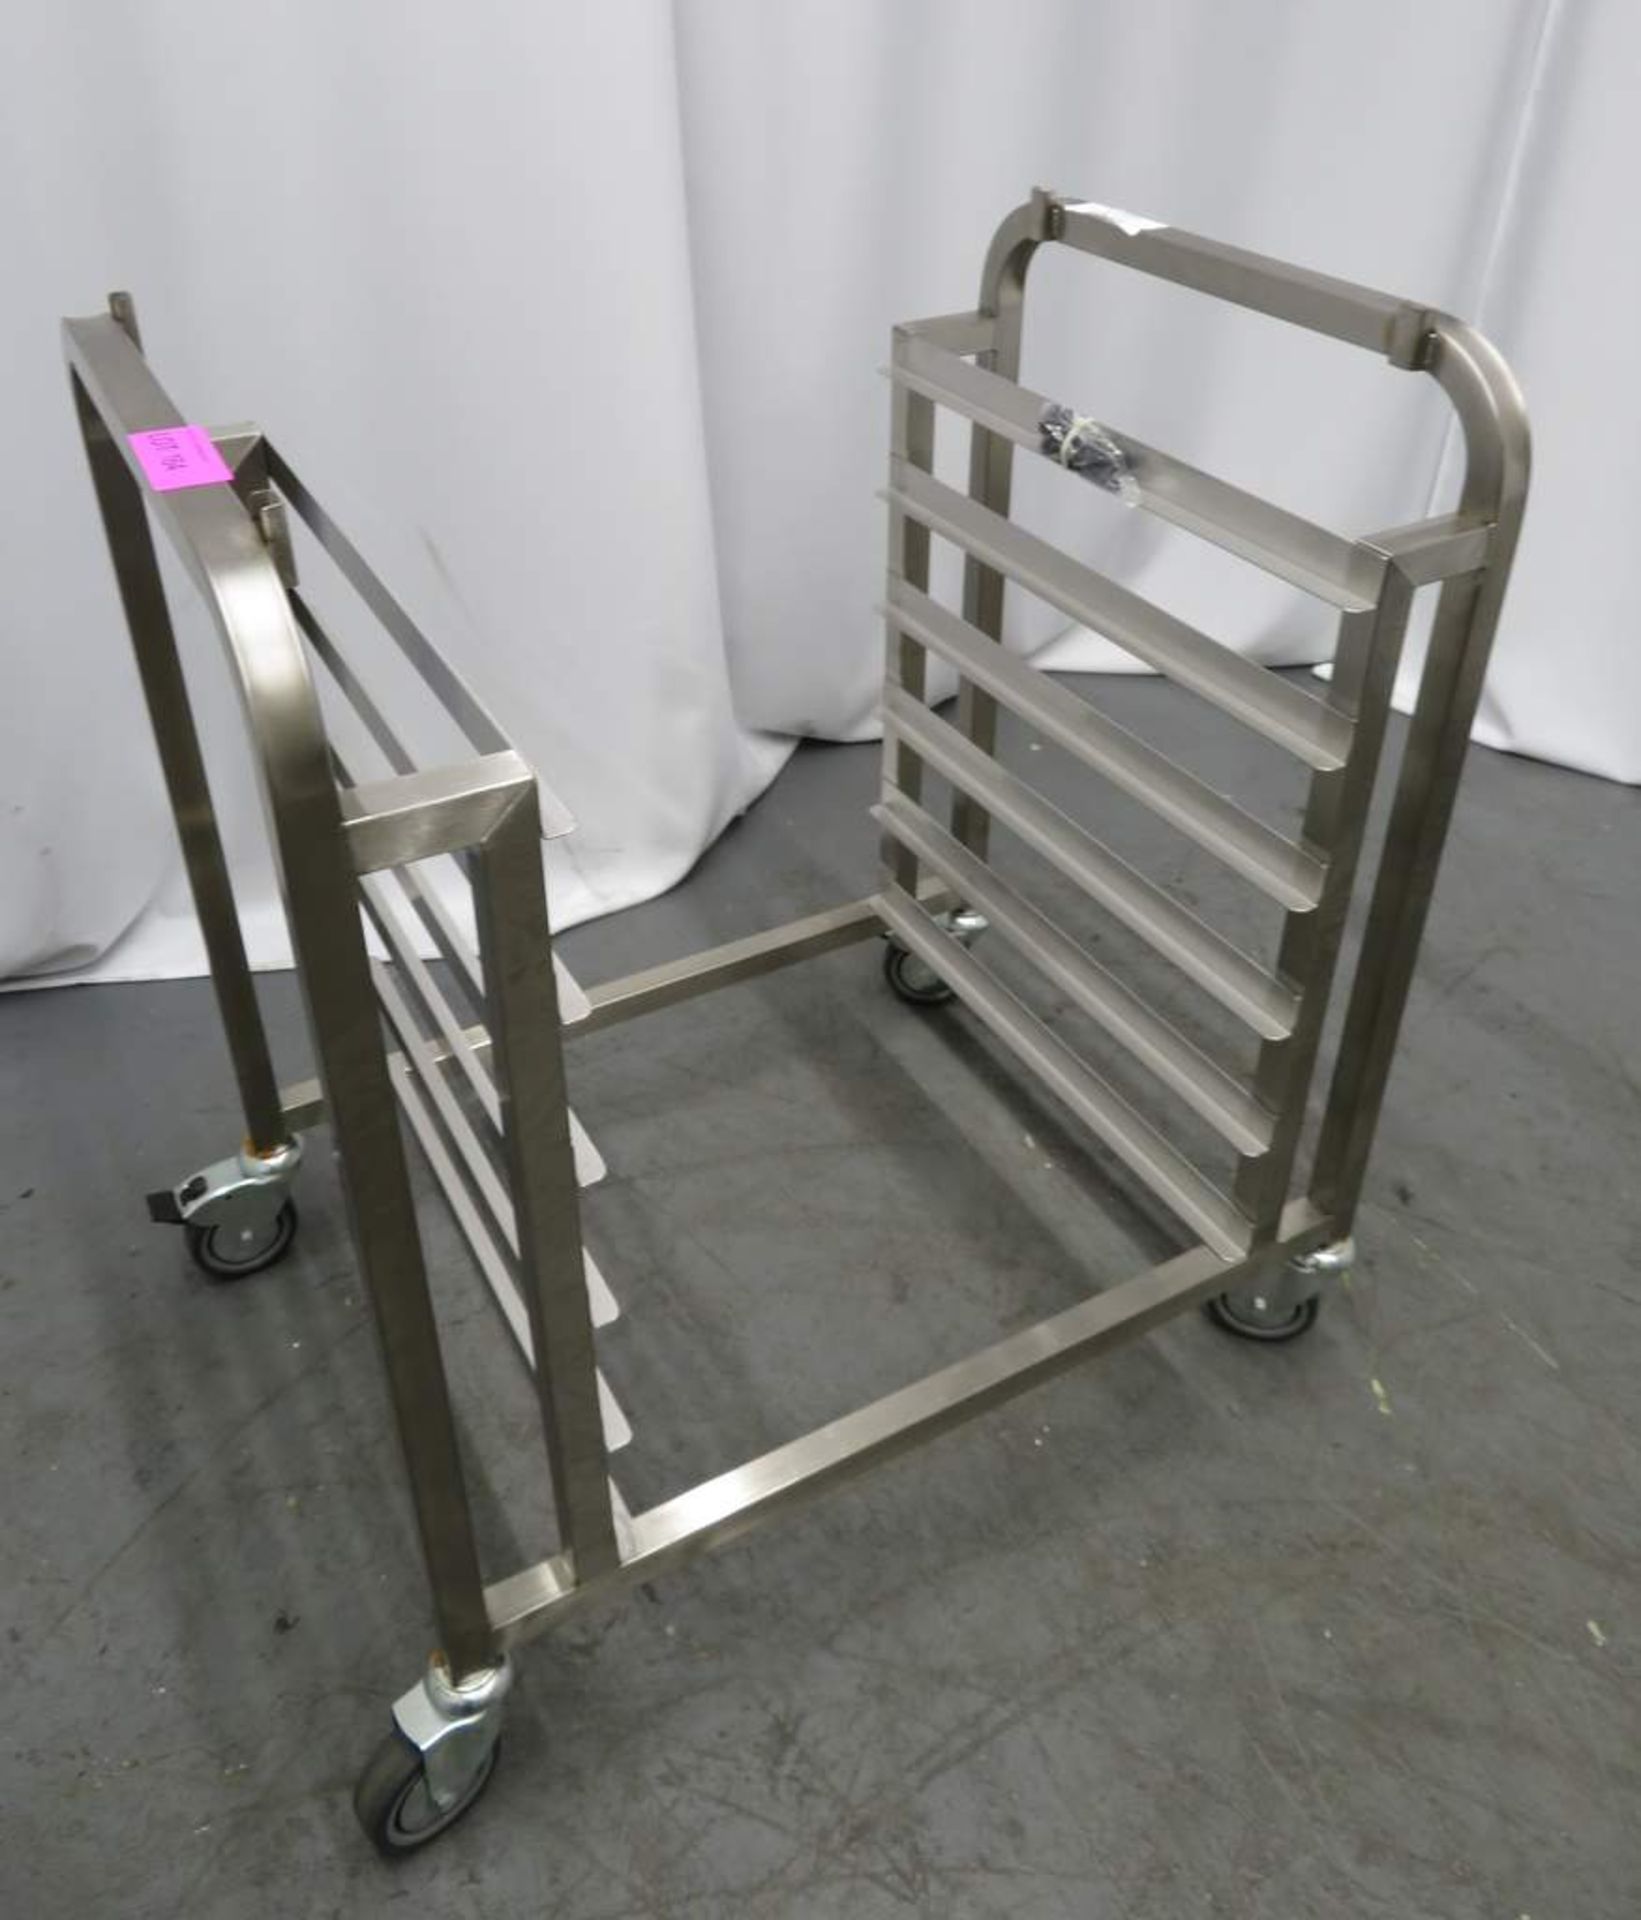 PORTABLE STAINLESS STEEL 6 TRAY OVEN STORAGE RACK - Image 4 of 4